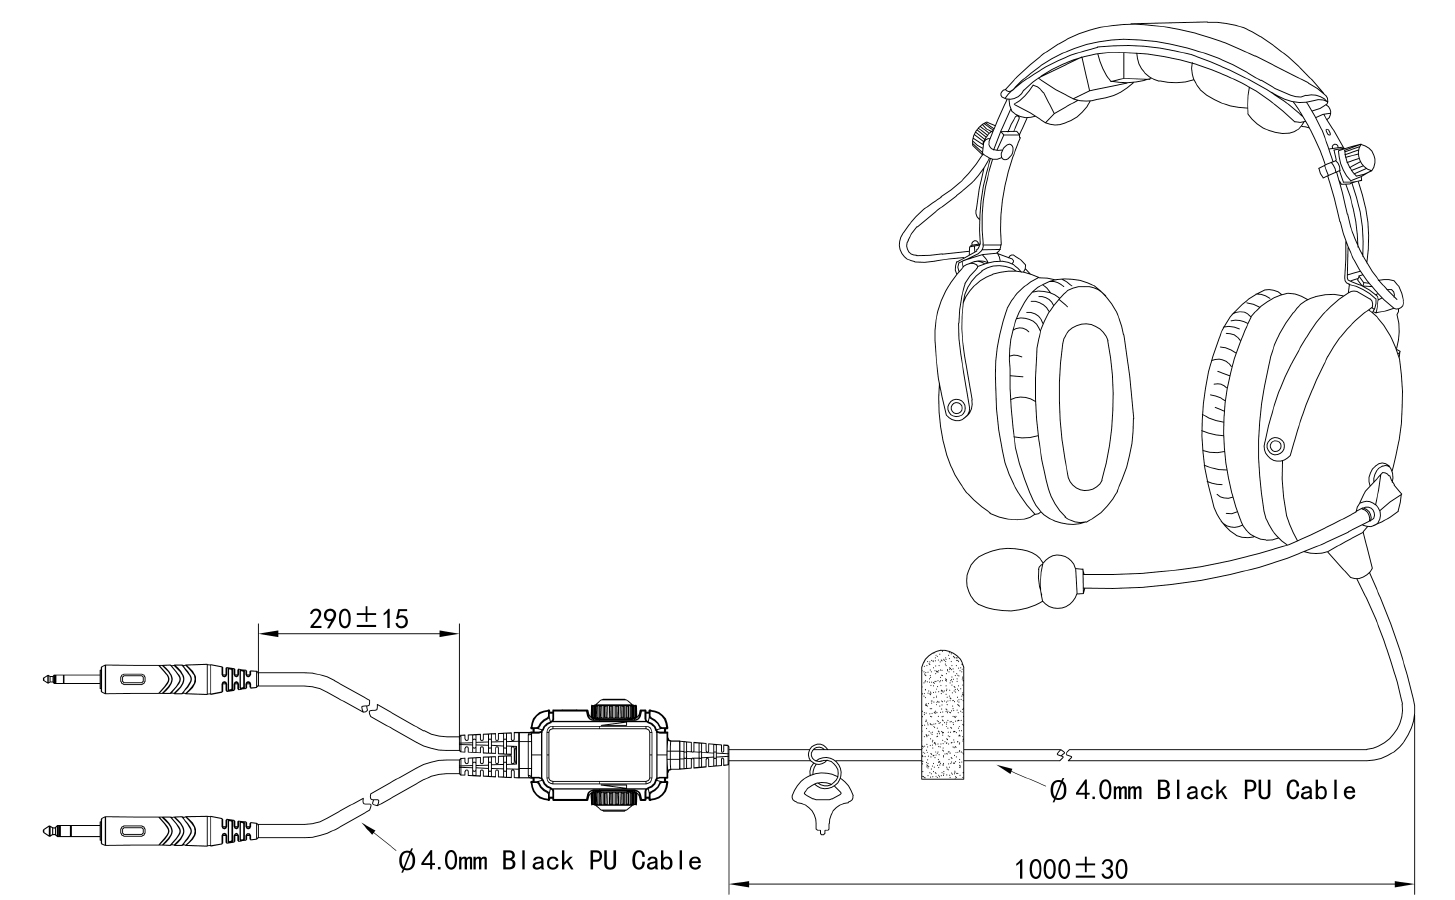 Specification of PH-400A Carbon Fiber lightweight PNR Passiv Noise Cancelling Aviation Headset For Airline Pilots